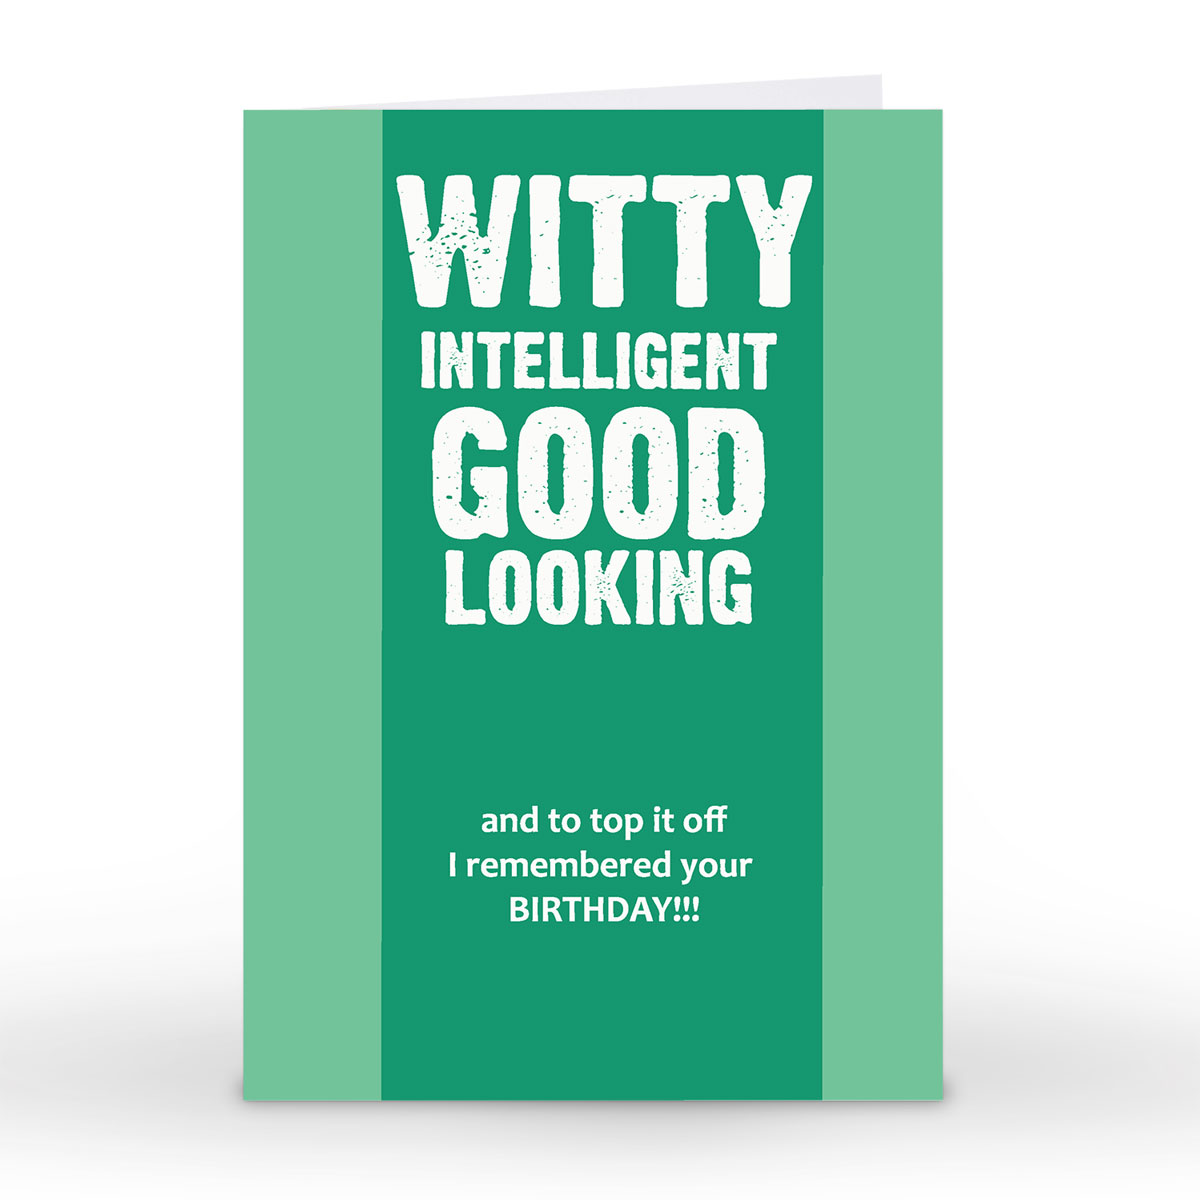 Quitting Hollywood Card - Witty, Intelligent, Goodlooking